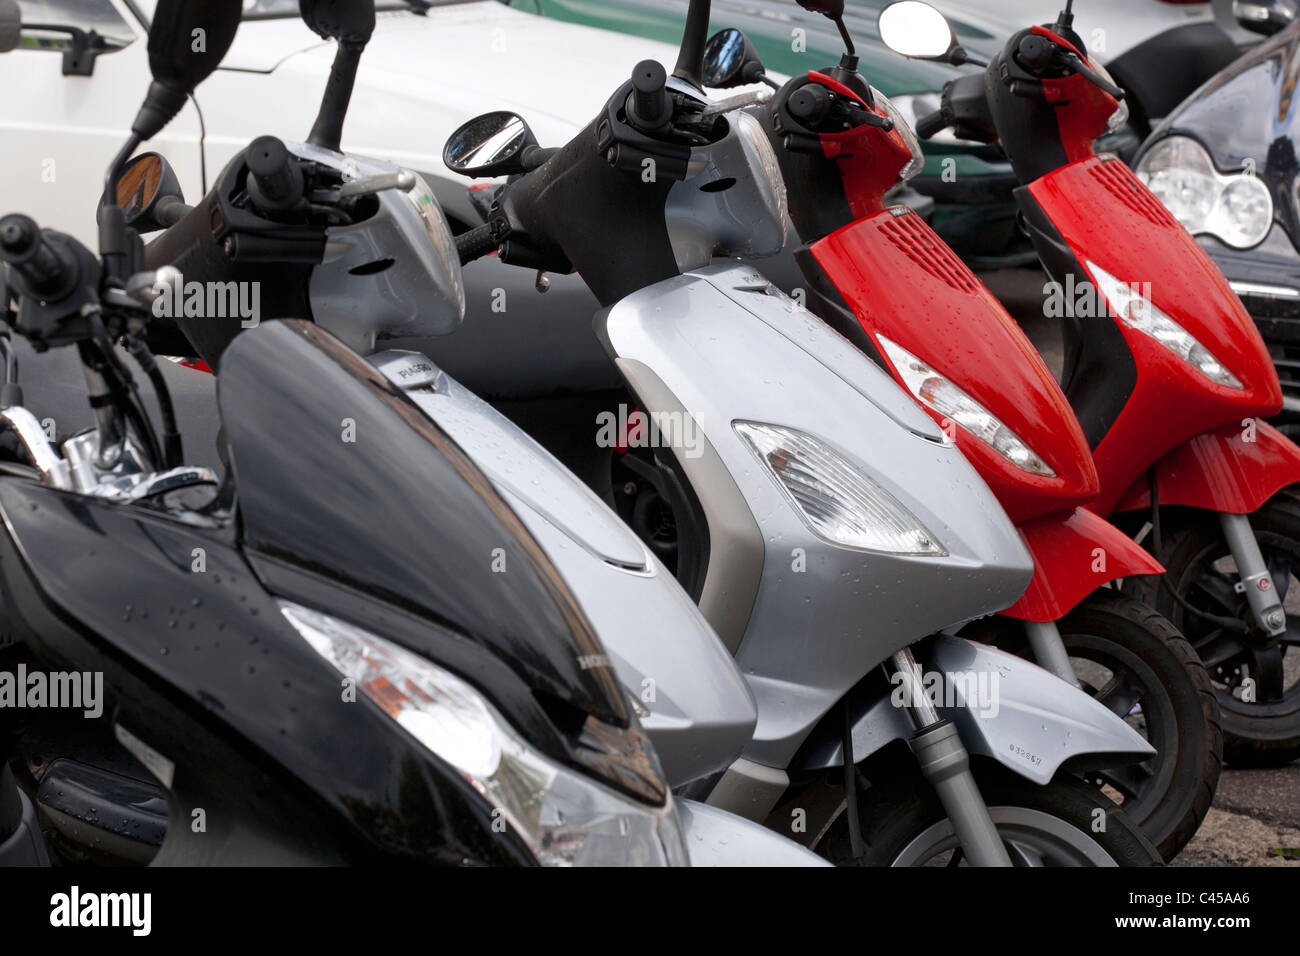 Corsica, row of scooters for hire Stock Photo